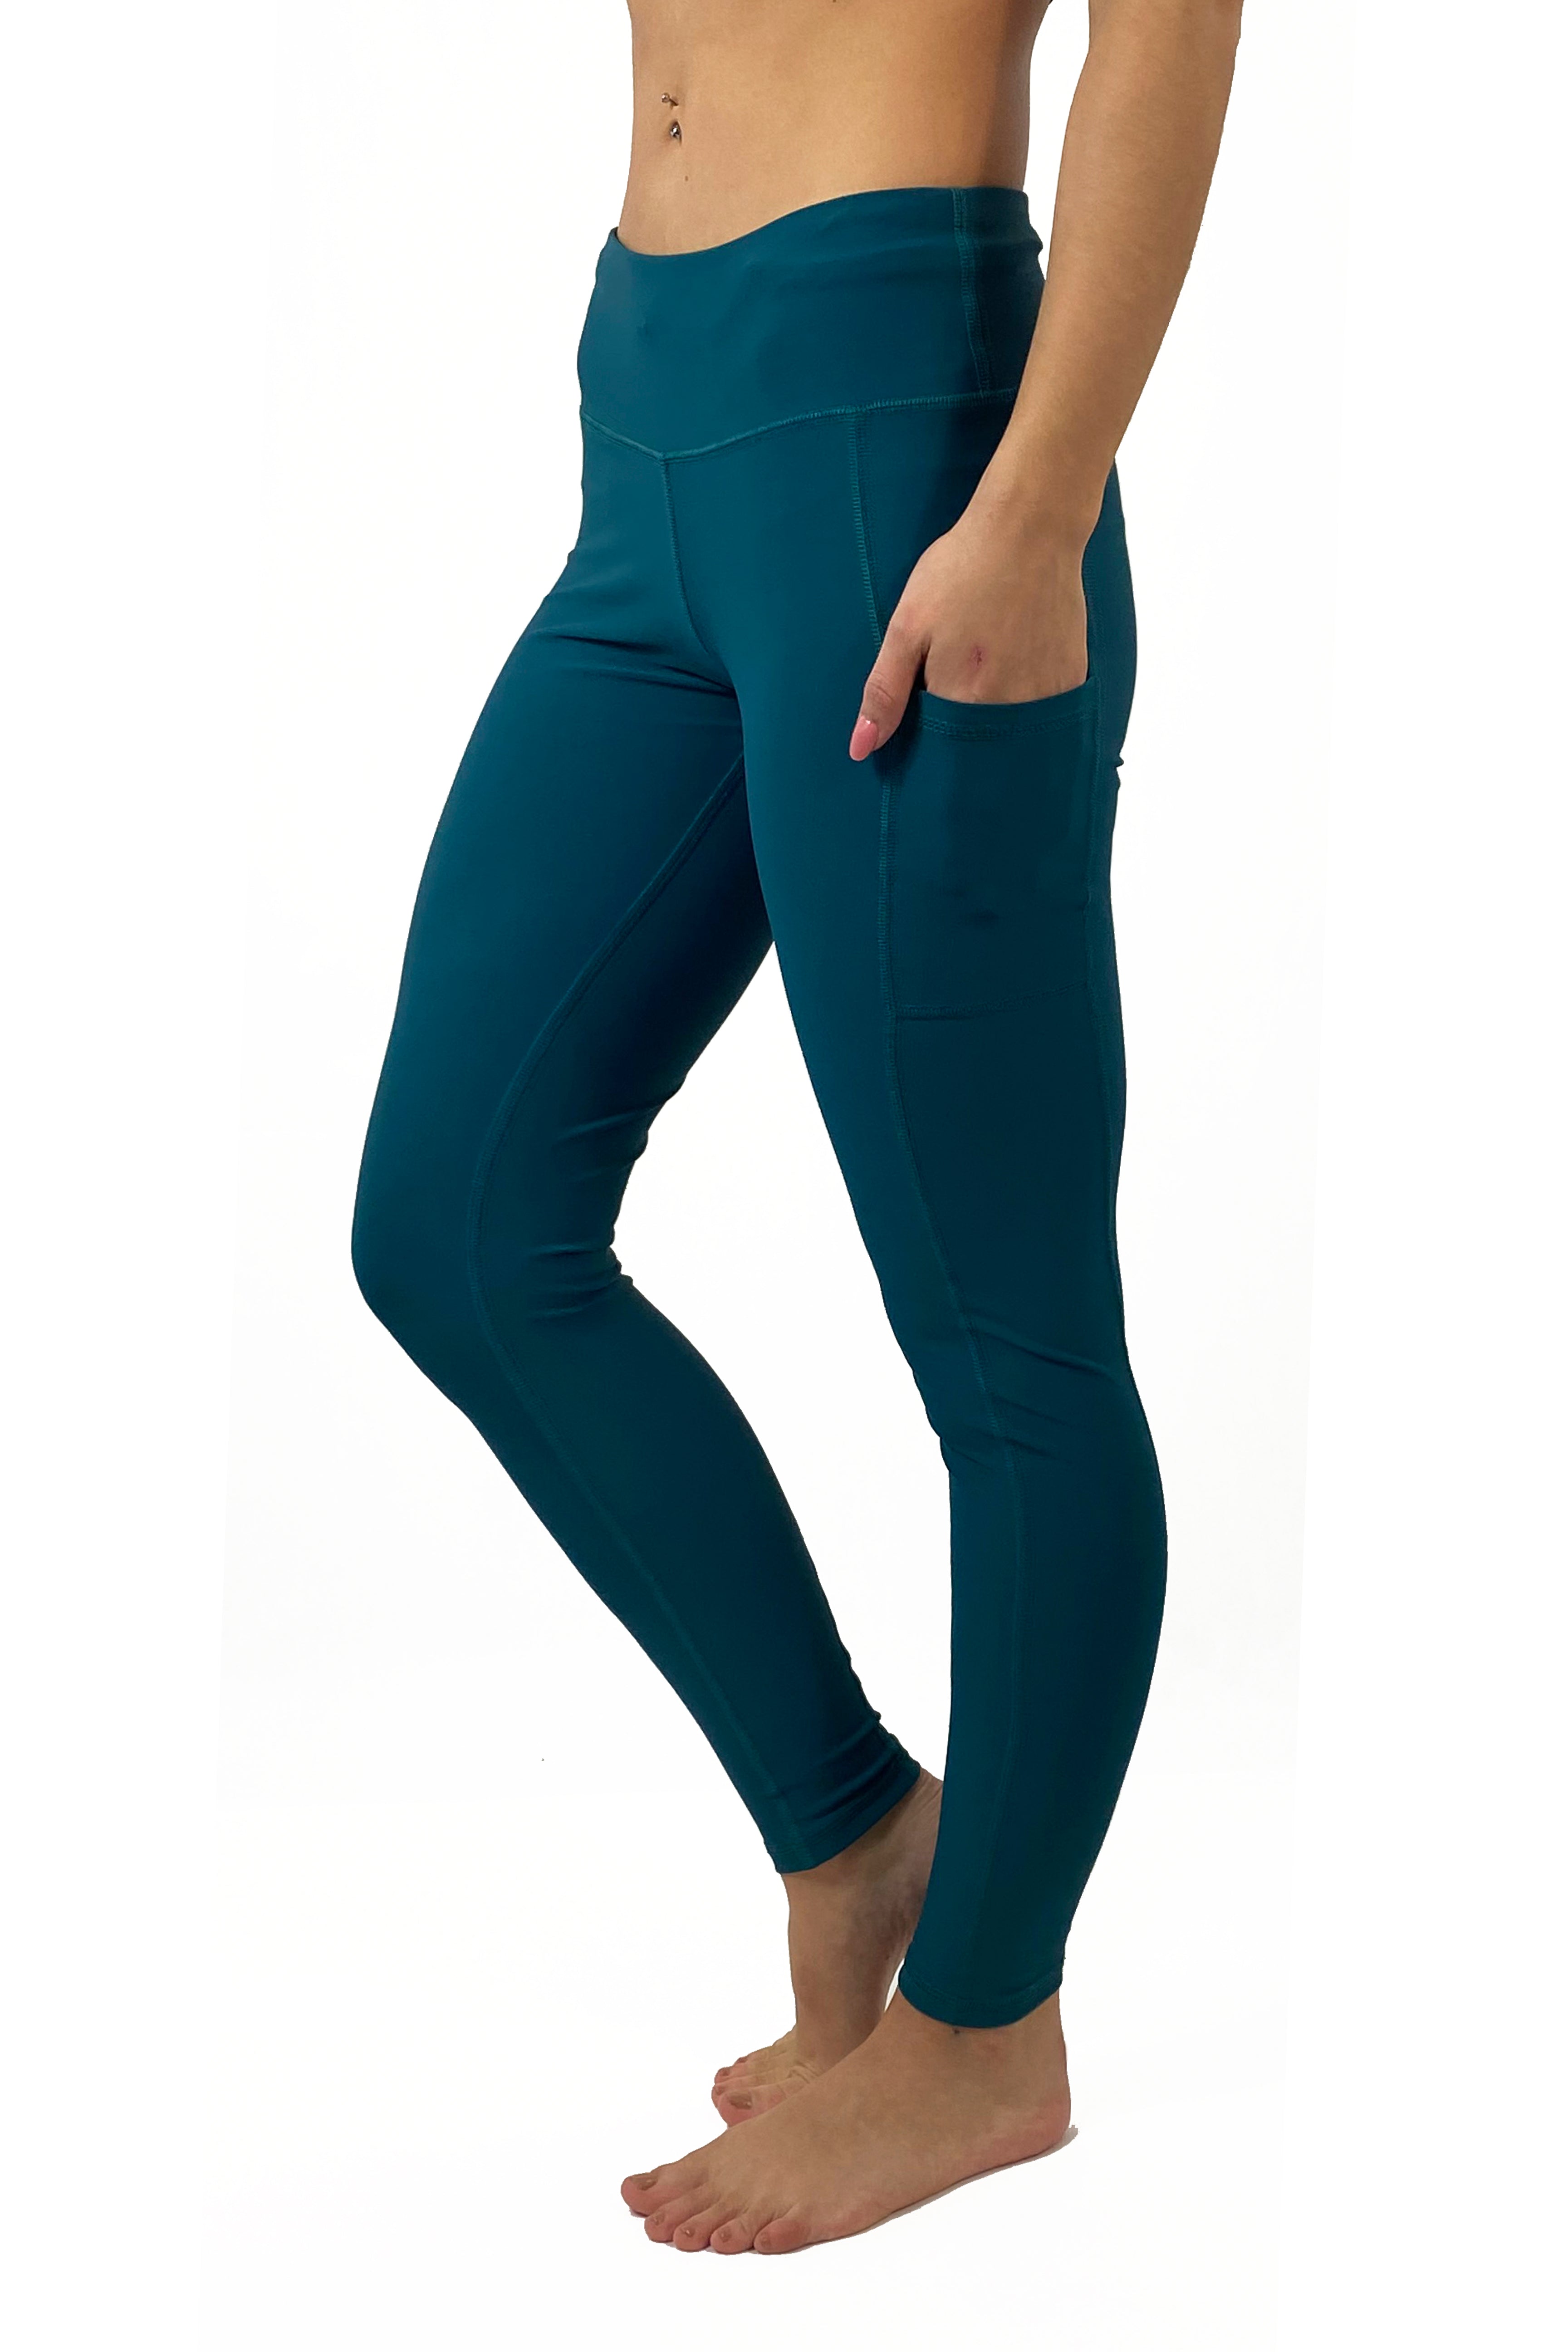 3000- The "Victory" Cell Phone Pocket Legging/ Emerald Green - FINAL SALE